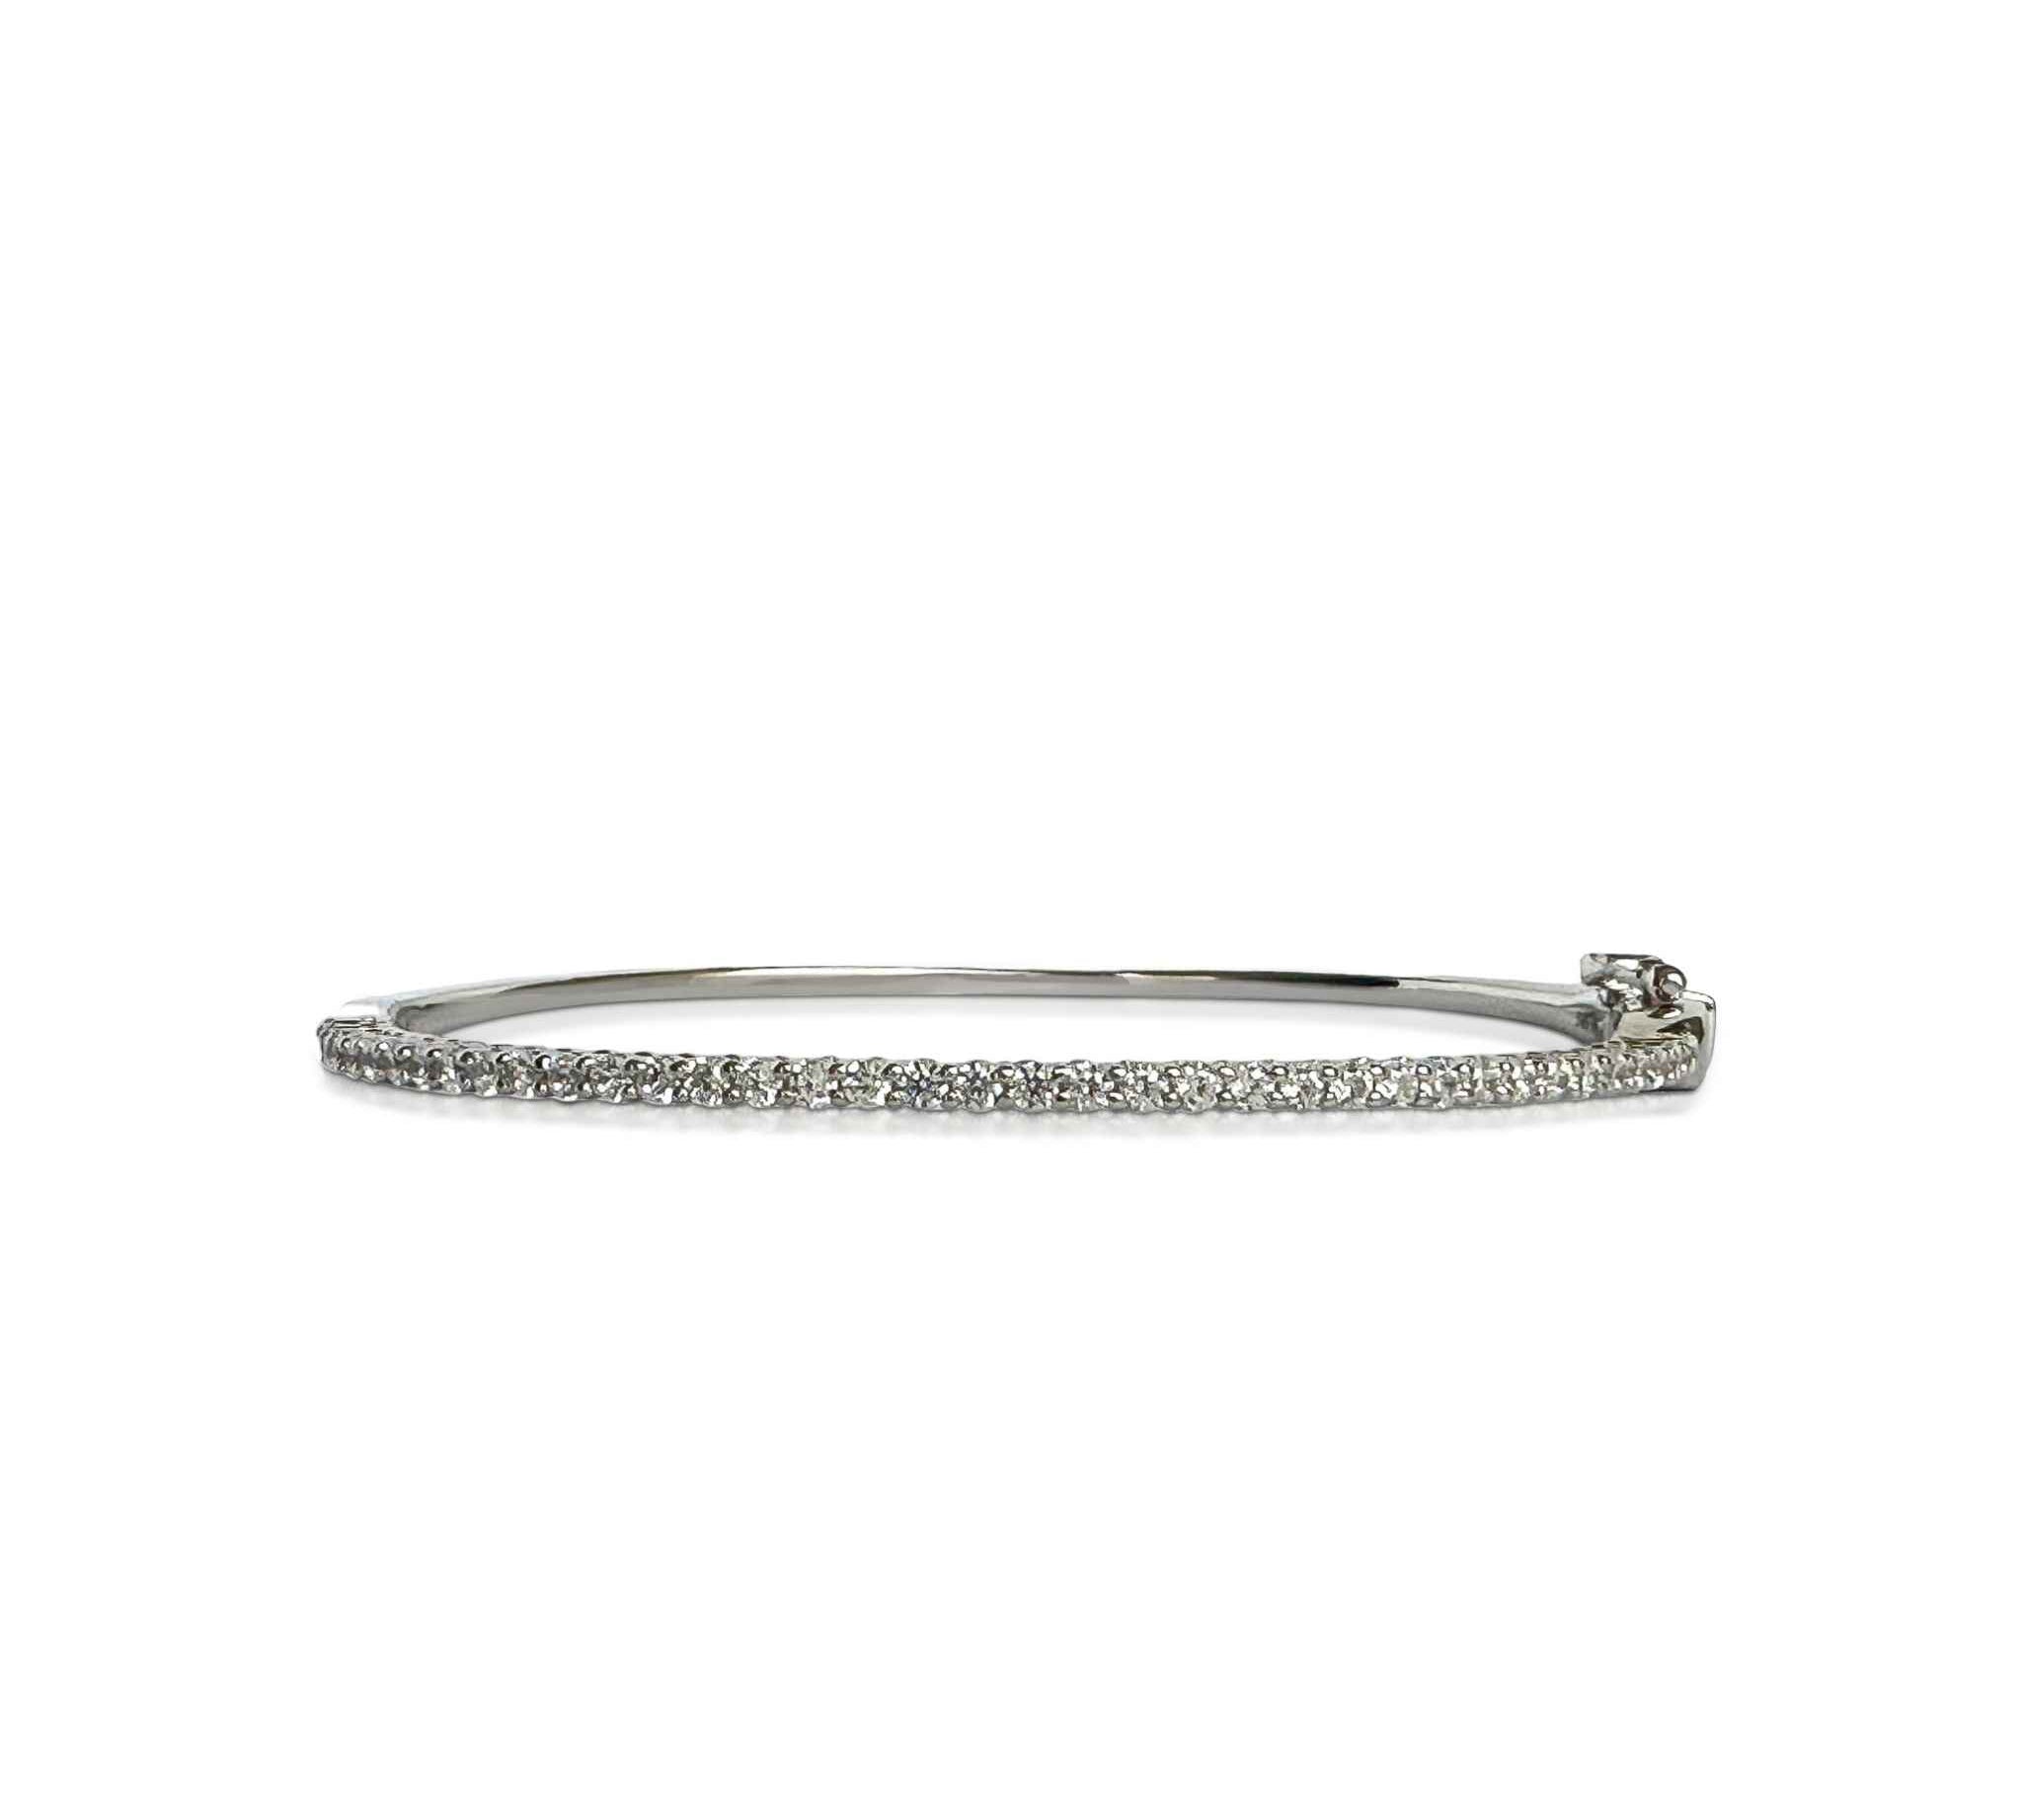 Elegant Waverly Bangle in 925 Sterling Silver by Alessandra James.